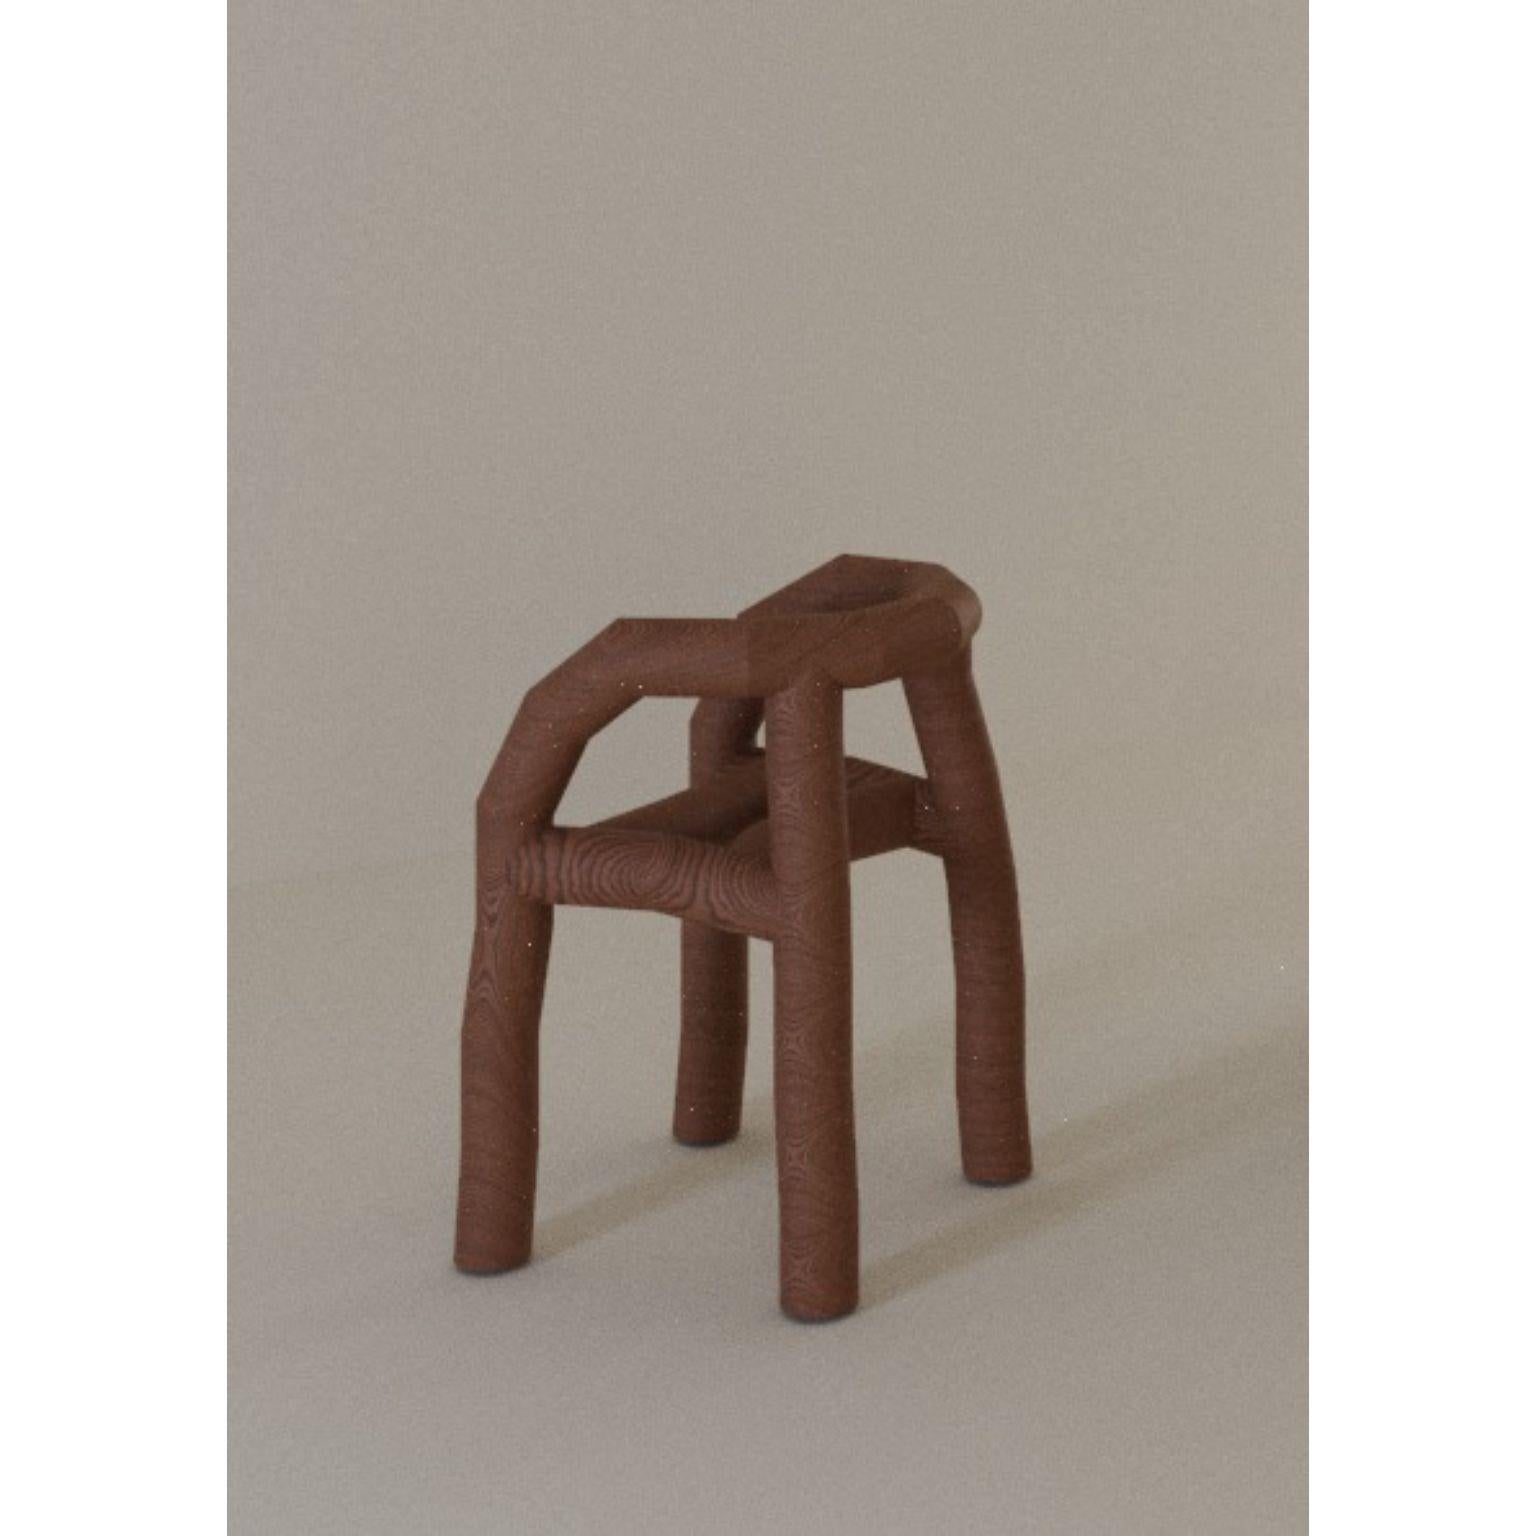 Segmento pine logs chair by Cara Davide
Dimensions: W70 x D60 x H 86 cm.
Materials: pine logs.
Color: light brown.
Also available in dark brown. 

Segmento perceives ordinary objects in an abstracted form through the act of breaking down and